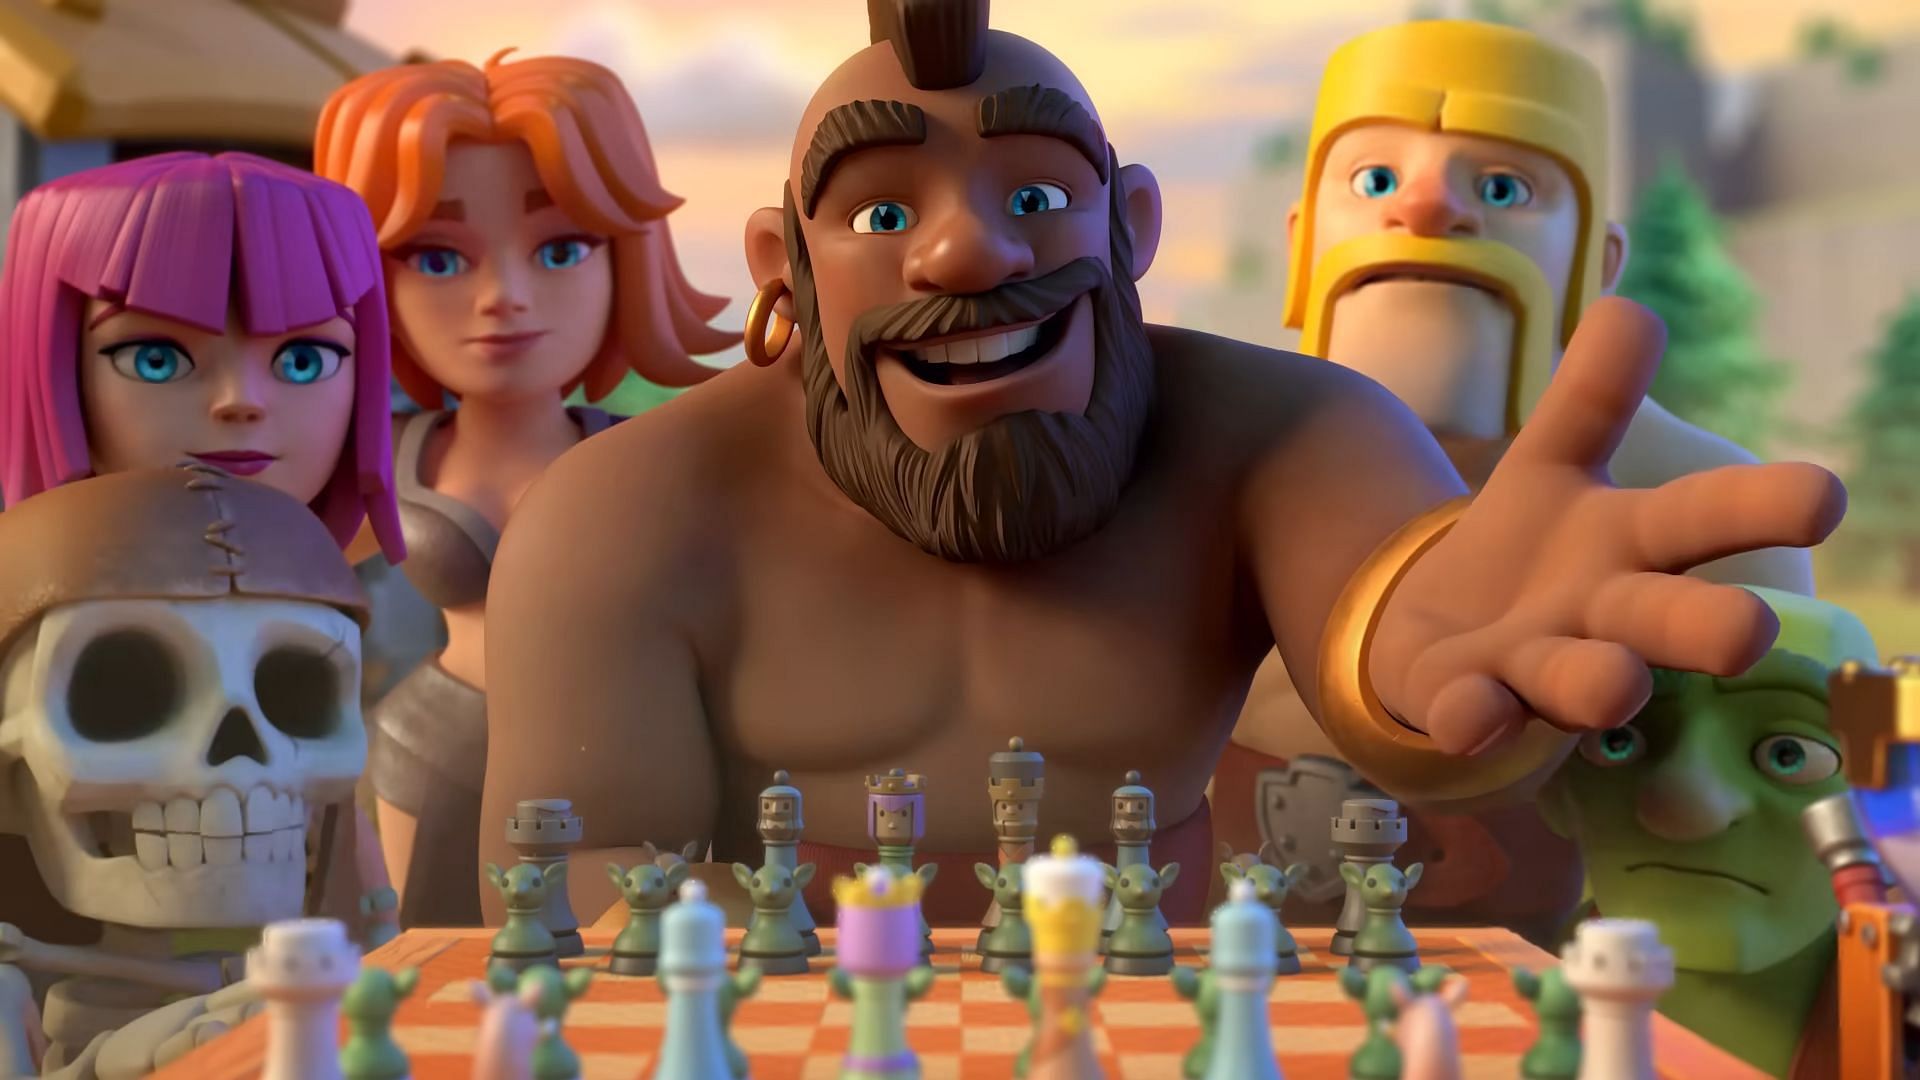 Chess - Clash of Kings Tips, Cheats, Vidoes and Strategies